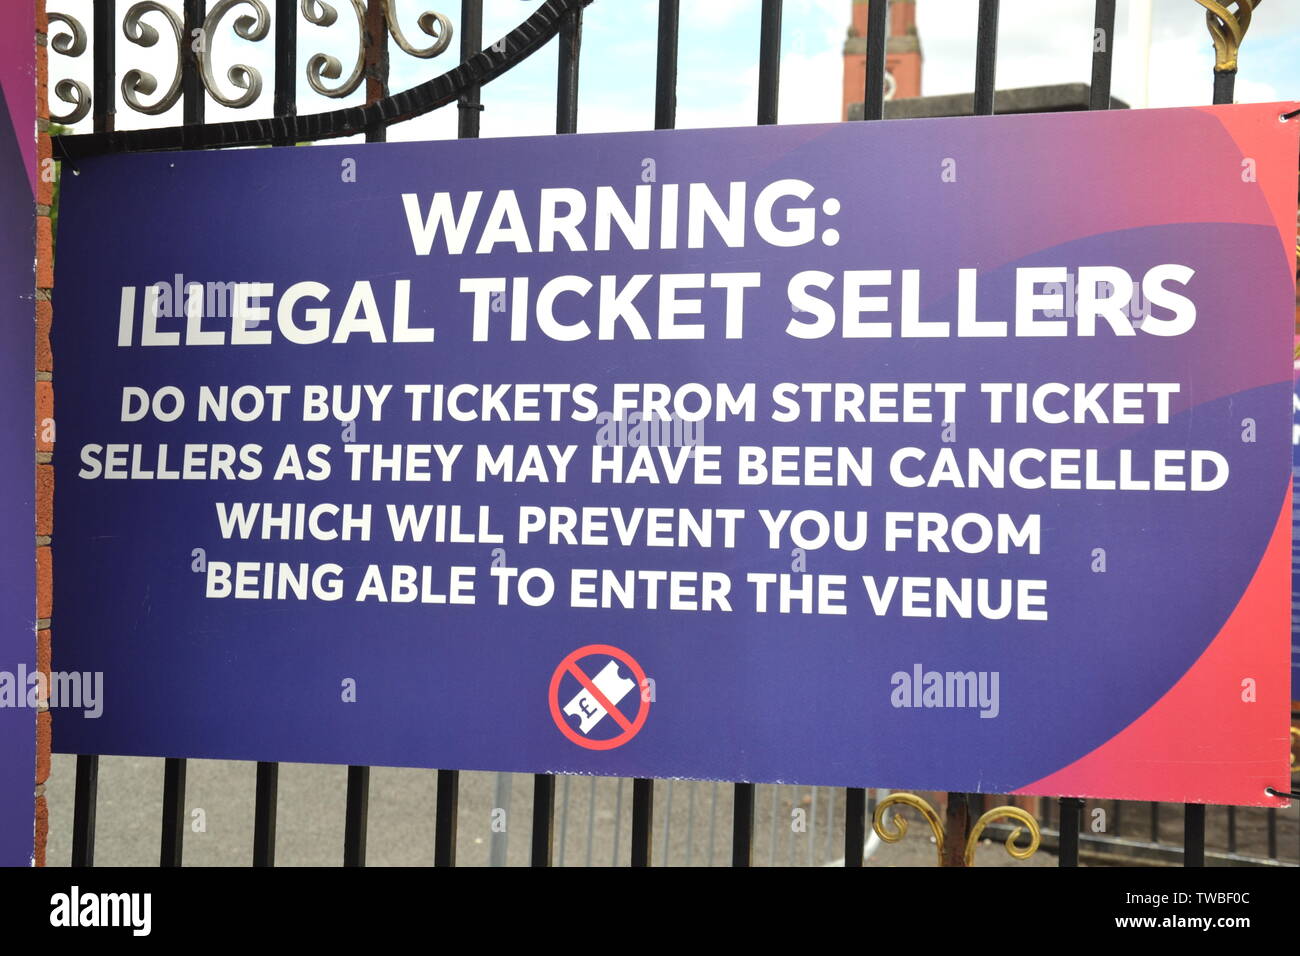 Sign warning of illegal ticket sellers at the entrance to the ICC Cricket World Cup 2019 at Lancashire Cricket Club, Old Trafford, Manchester. The 2019  International Cricket Council (ICC) Cricket World Cup is being hosted by England and Wales from May 30th to July 14th, 2019. Six matches are being held at Old Trafford, Manchester, more than at any other venue. Stock Photo